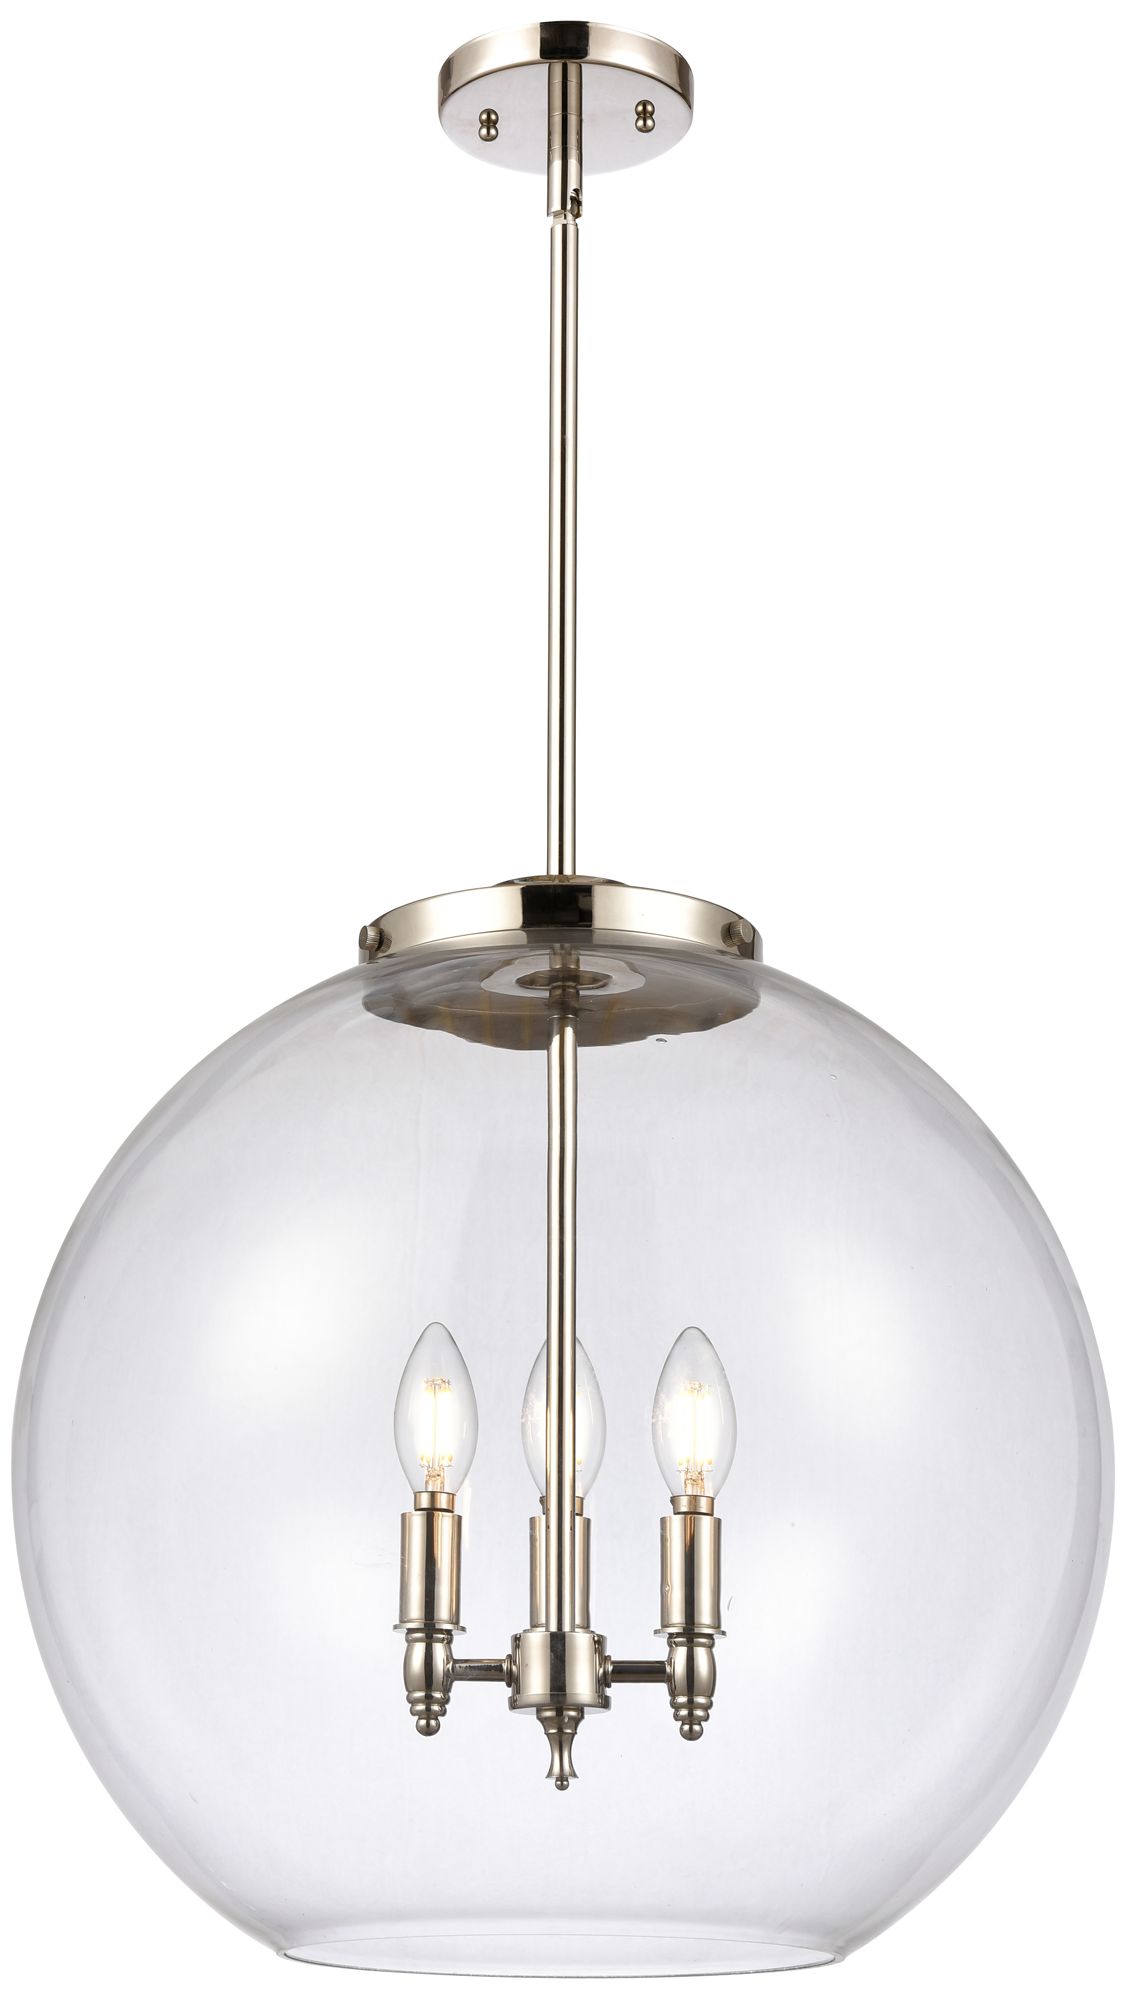 Athens 18.38" 3 Light Nickel LED Pendant w/ Clear Shade